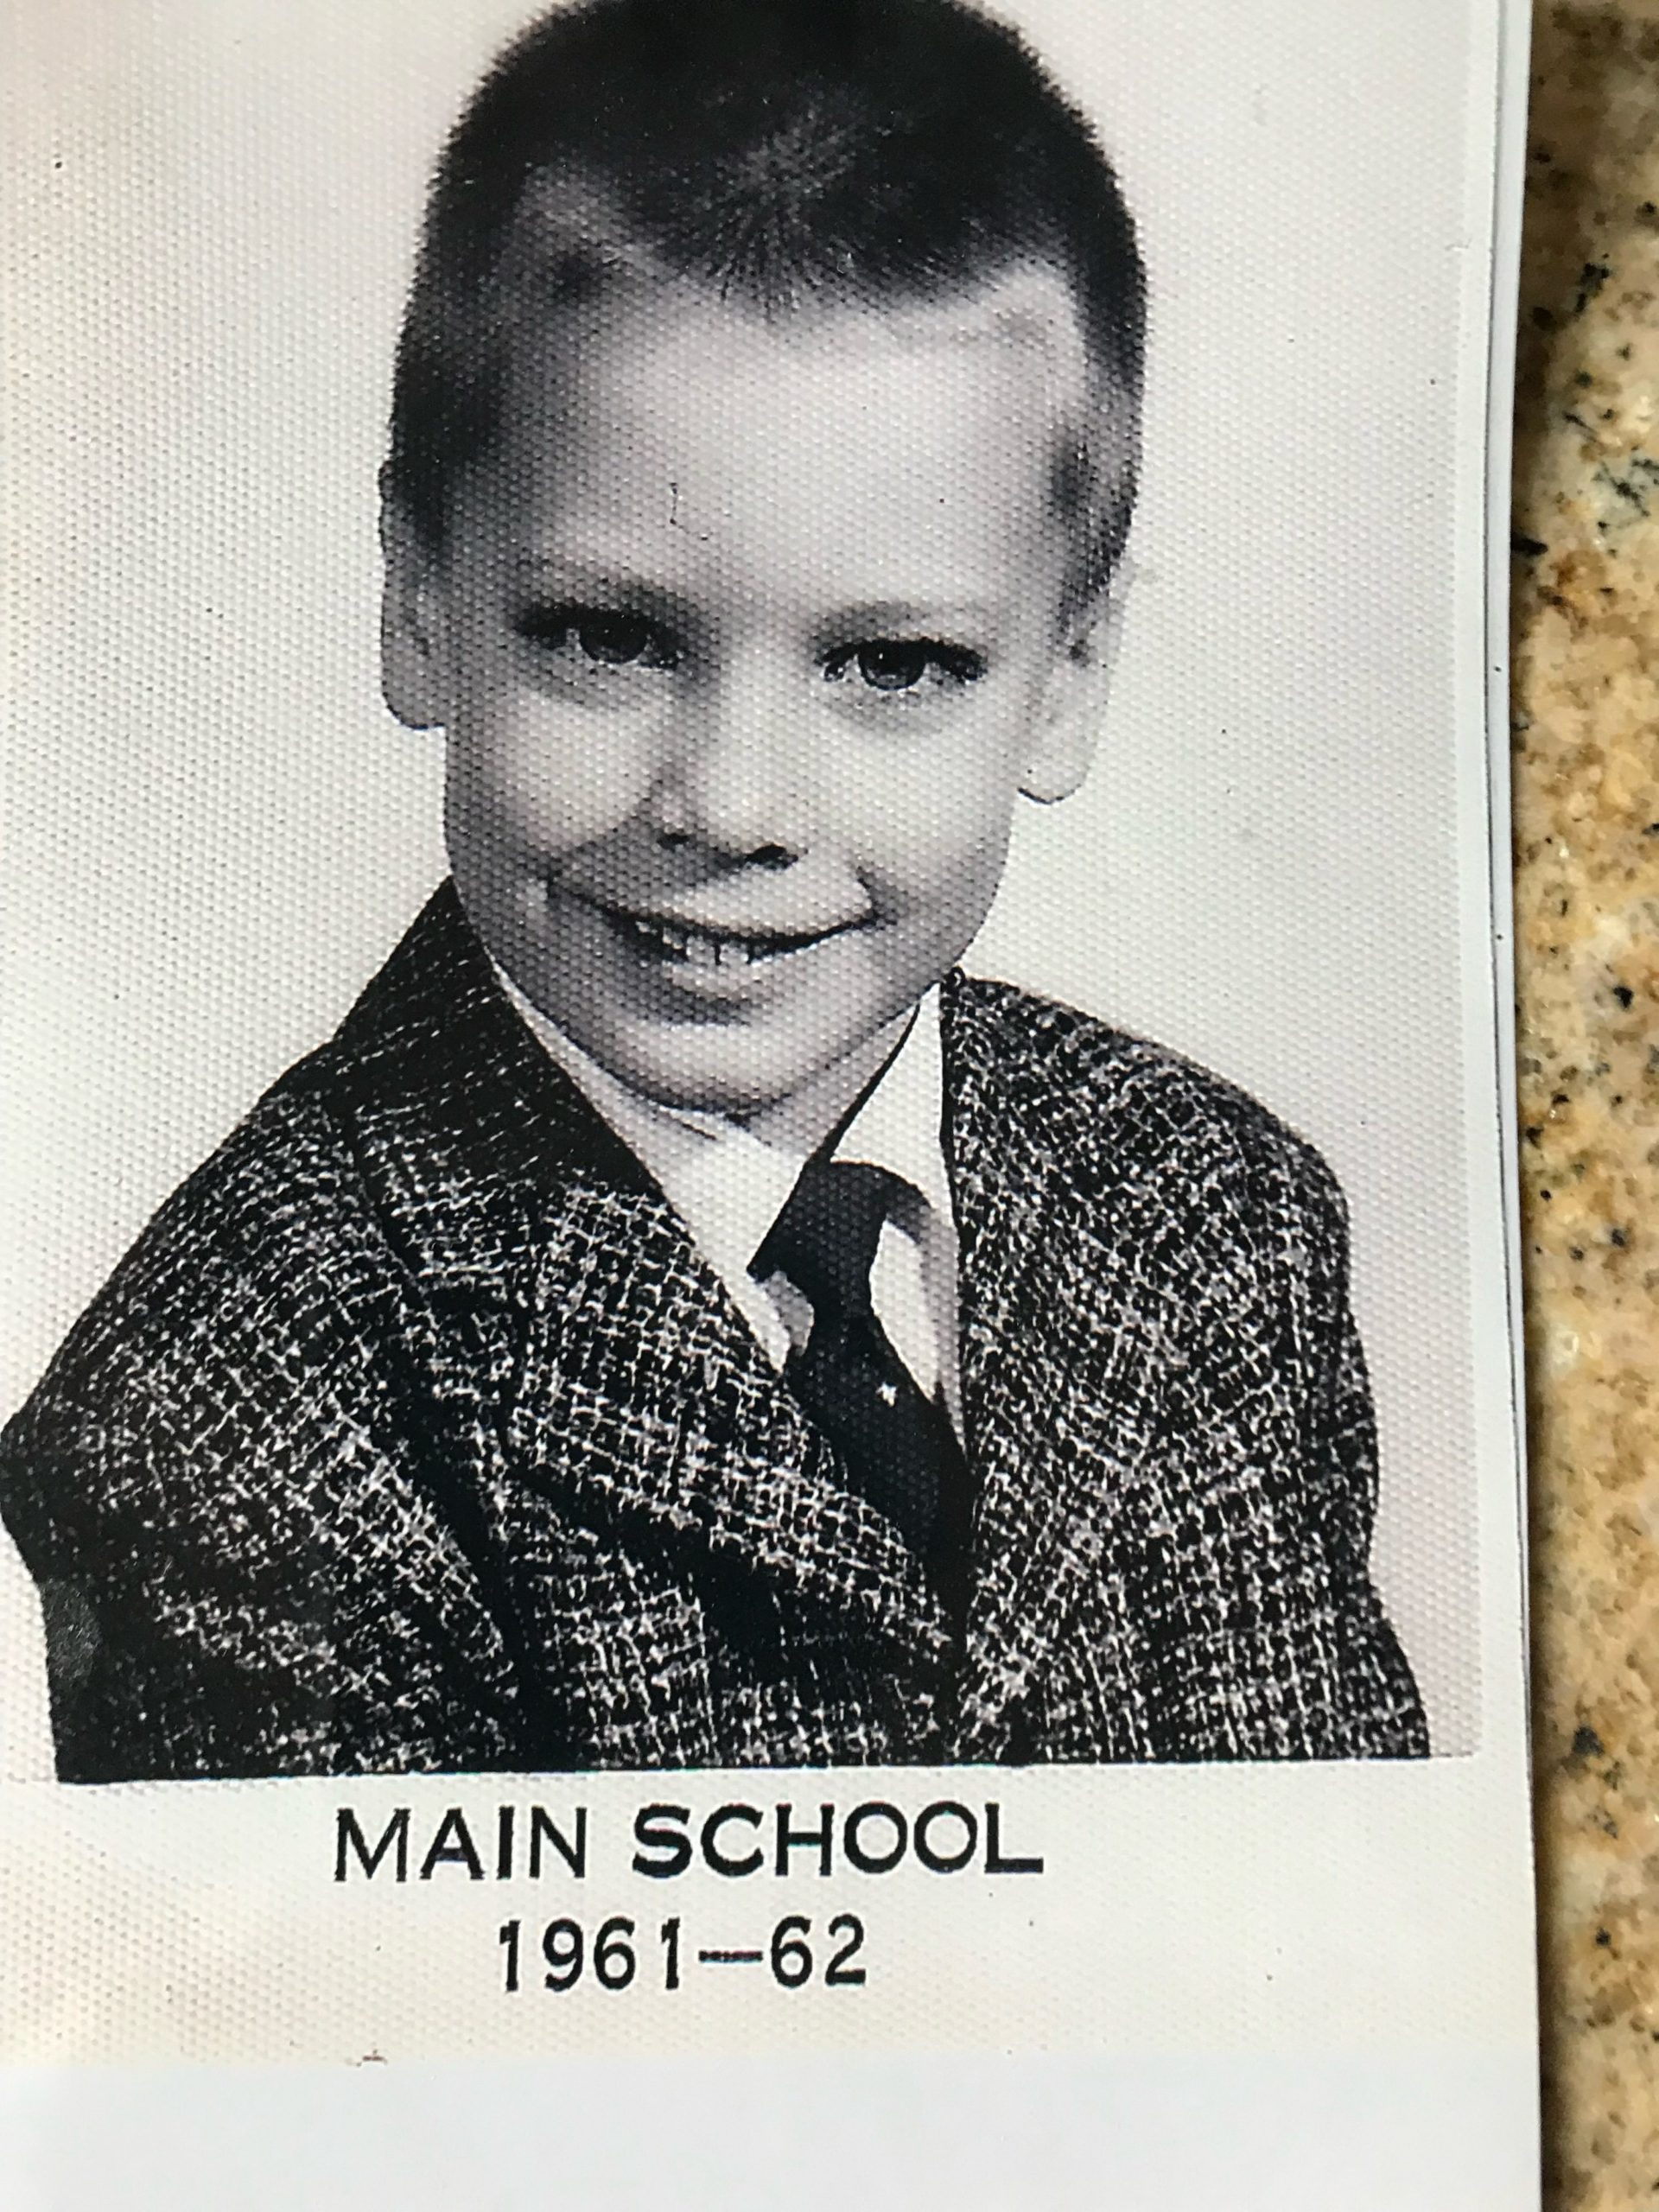 A black and white yearbook photo of a young boy in a plaid suit. Below the photo reads the caption: "MAIN SCHOOL 1961-62"